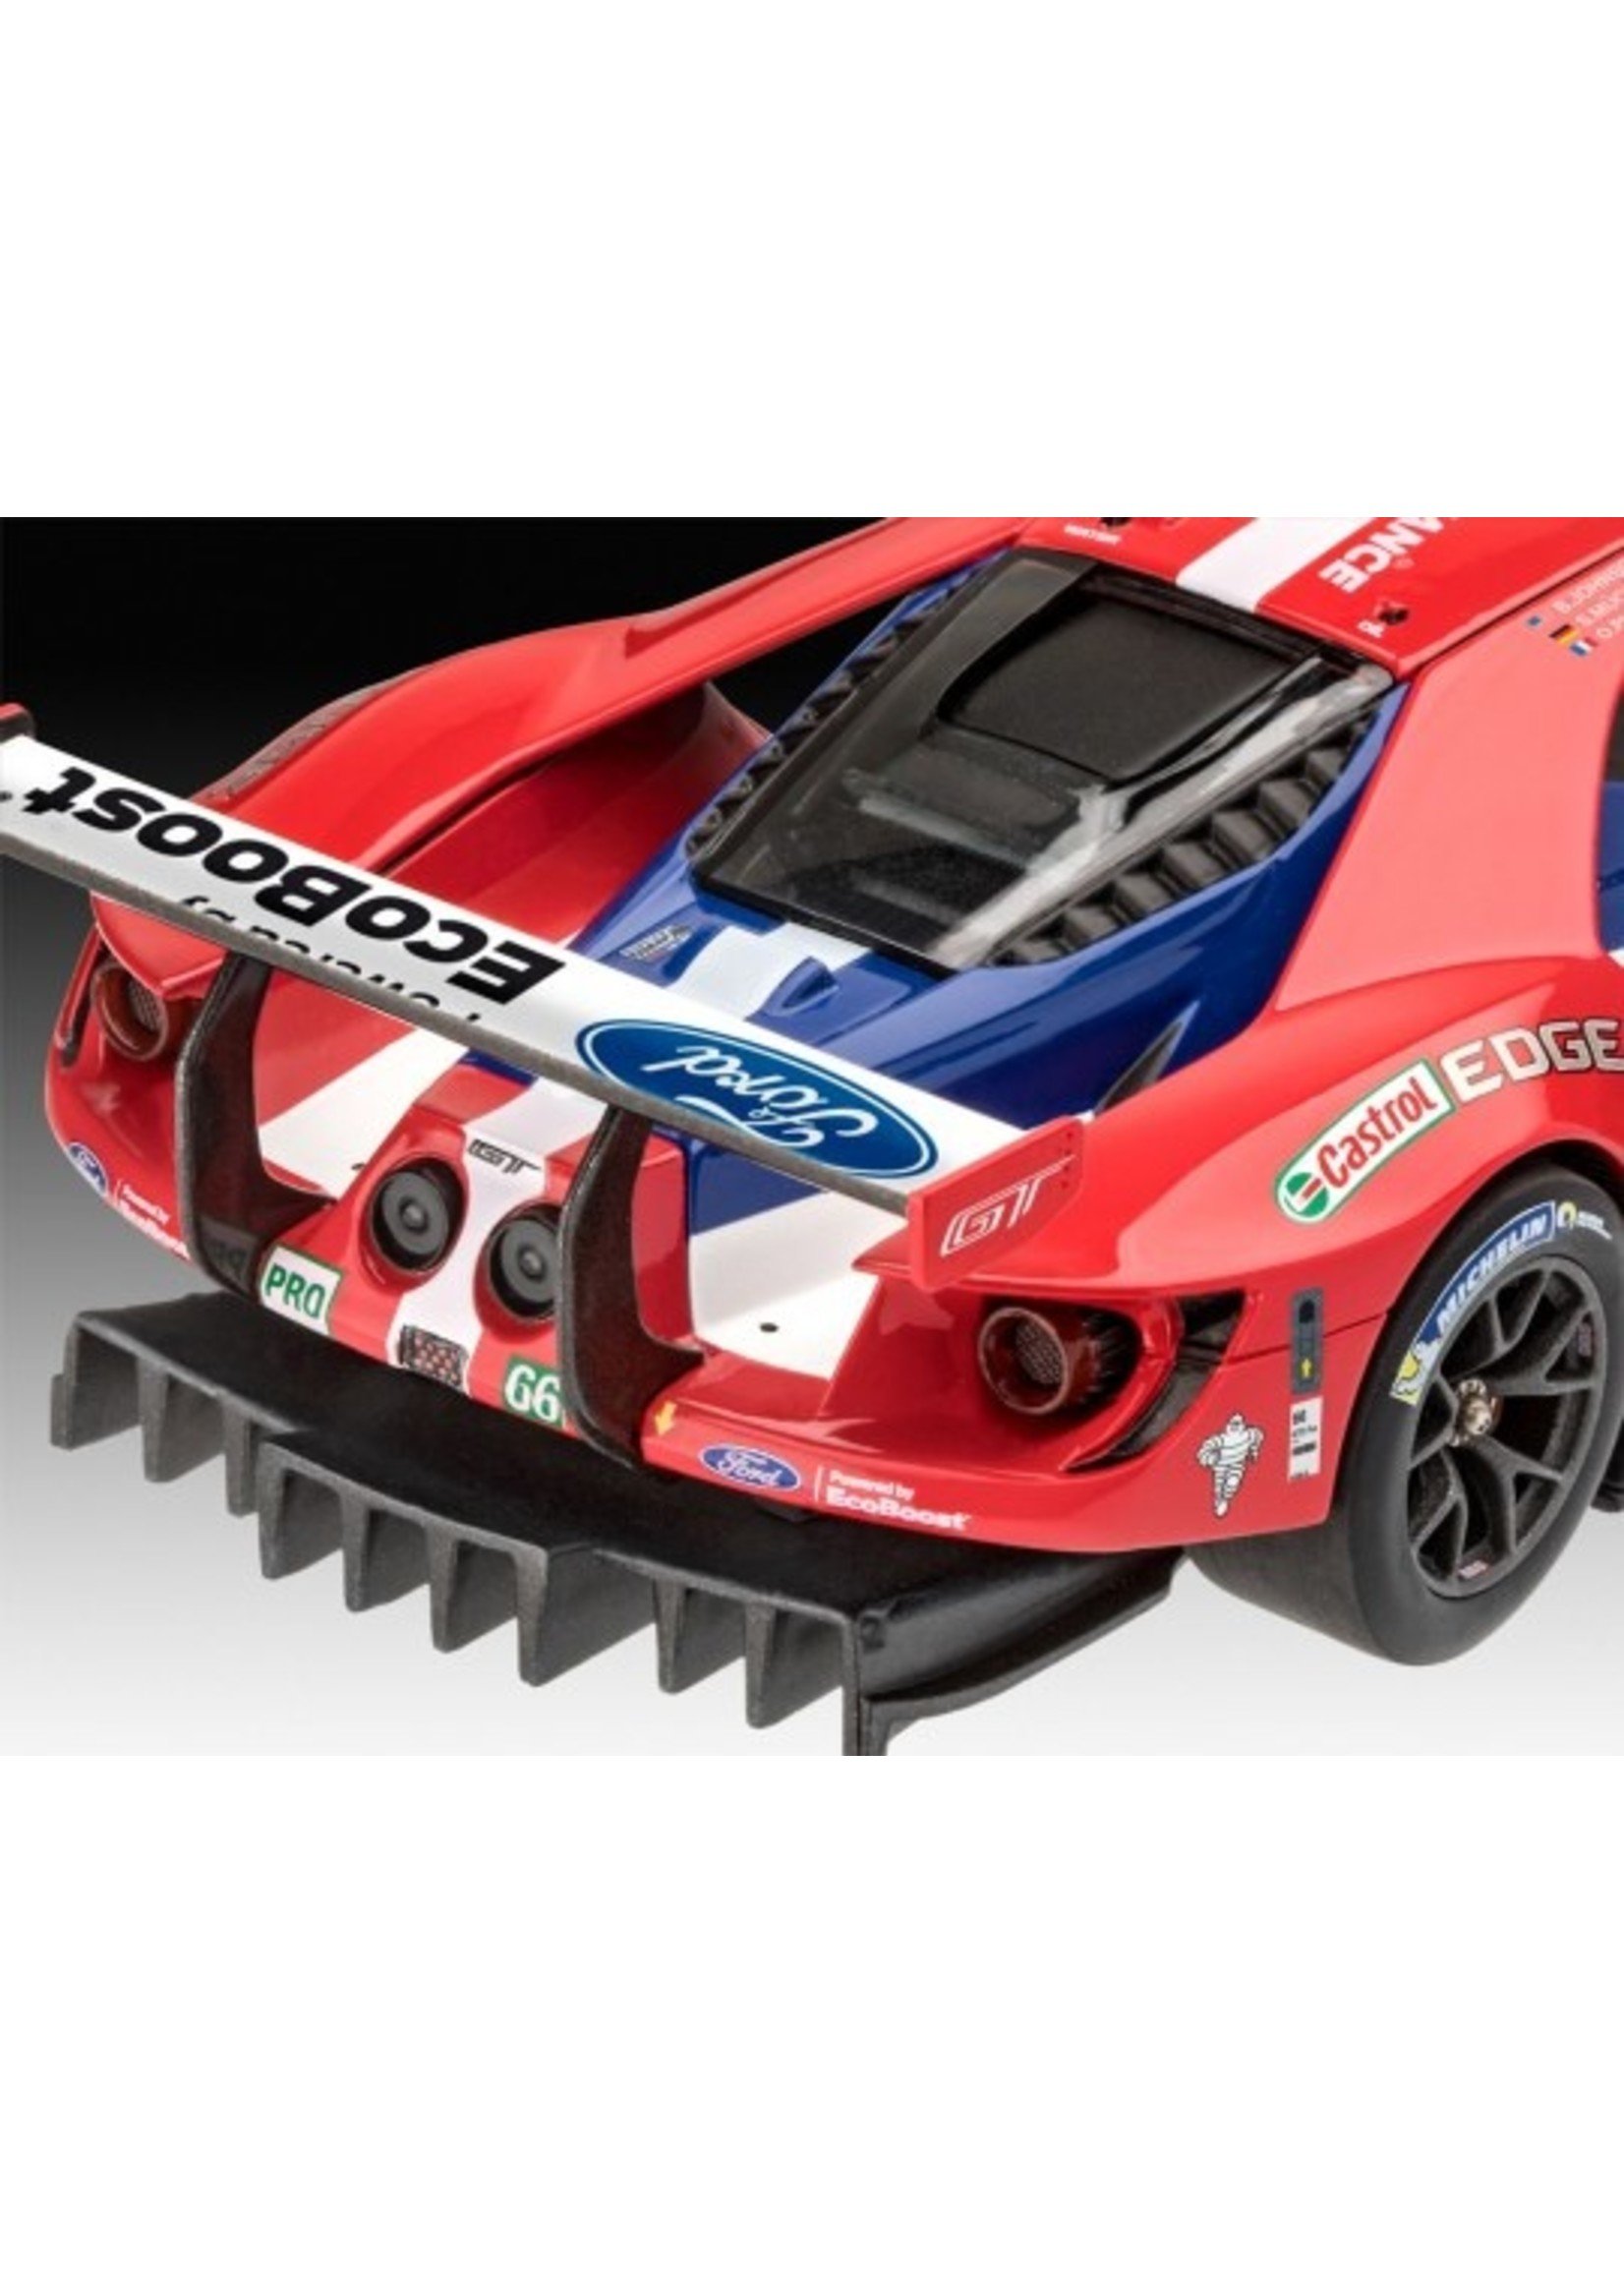 Revell of Germany 07041 - 1/24 Ford GT LeMans 2017 Race Car